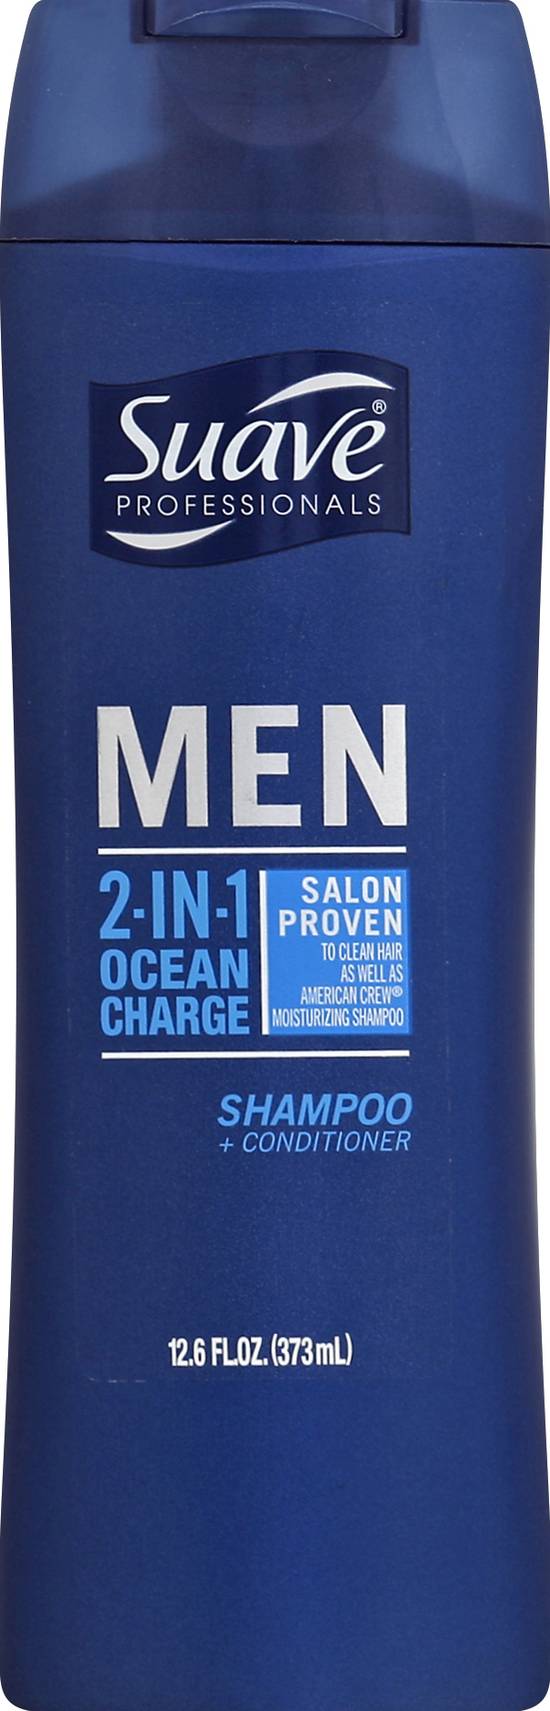 Suave Men 2-in-1 Ocean Charge Shampoo & Conditioner